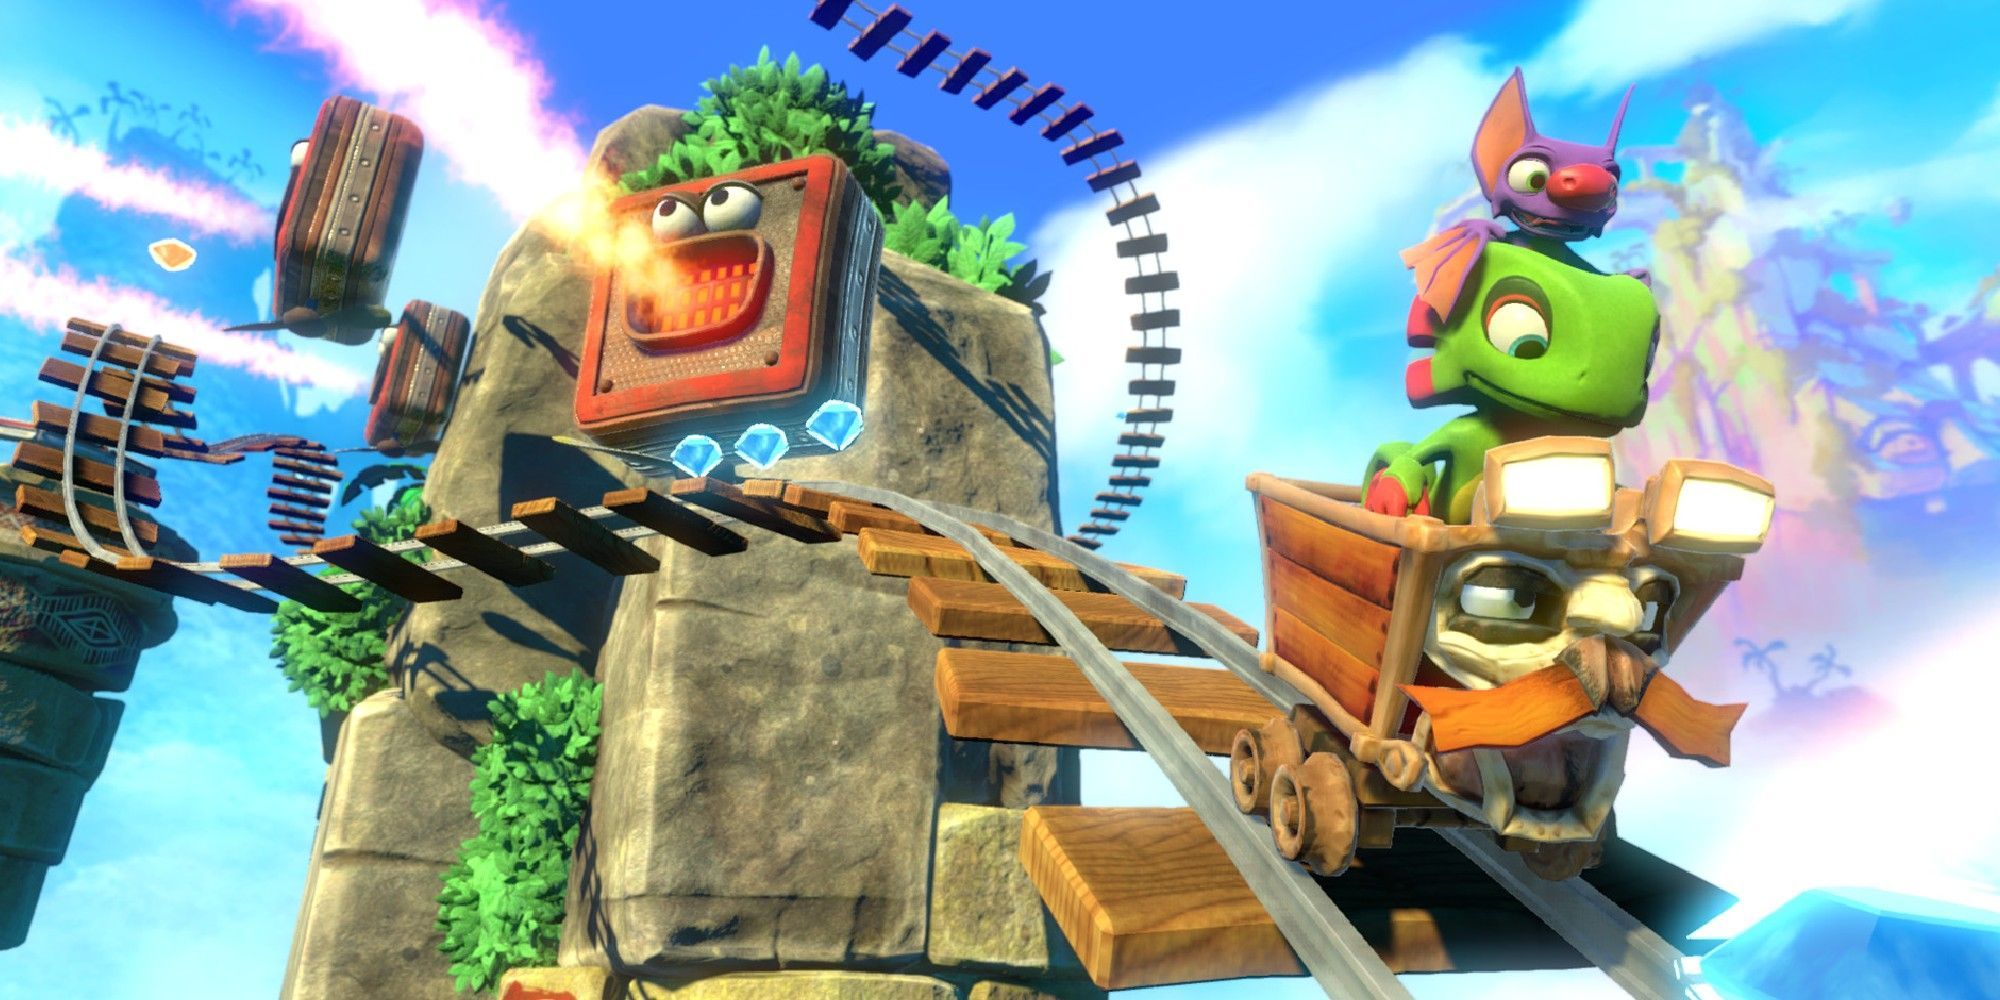 Yooka-Laylee - Yooka And Laylee Riding A Mine Cart Down A Dangerous Track Filled With Flamethrowers